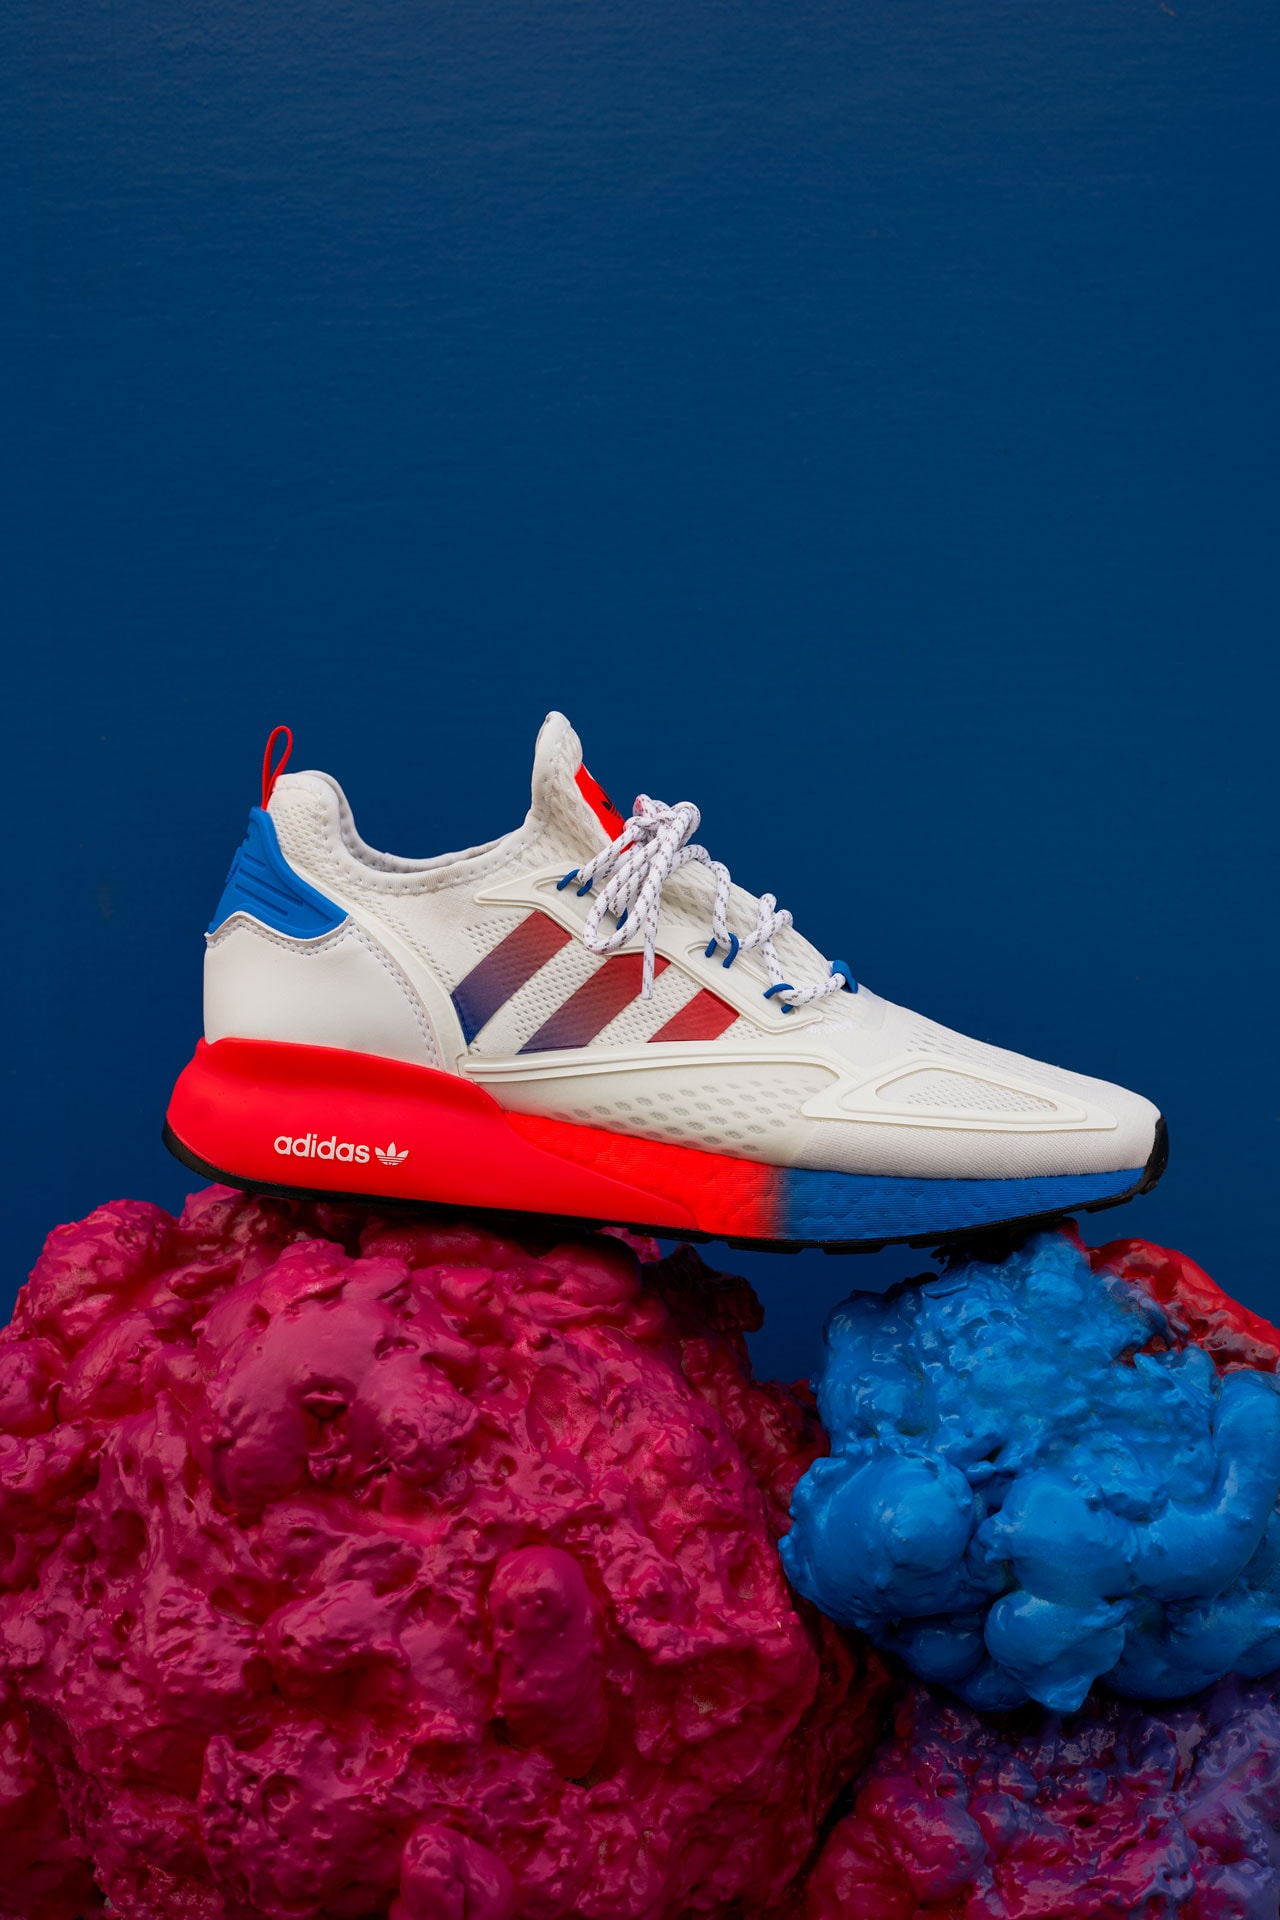 Oddly satisfying design and technology Zxience Network Ninja flexibility Sean Wotherspoon color gradients Mette Towley comfort actor Ranveer Singh squishiness Stream of ConZXiousness Adiprene X outsole solar red shock pink Stark Blue gradient sole white mesh upper black striples blue accents BOOST technology ombre colour palette toe to heel